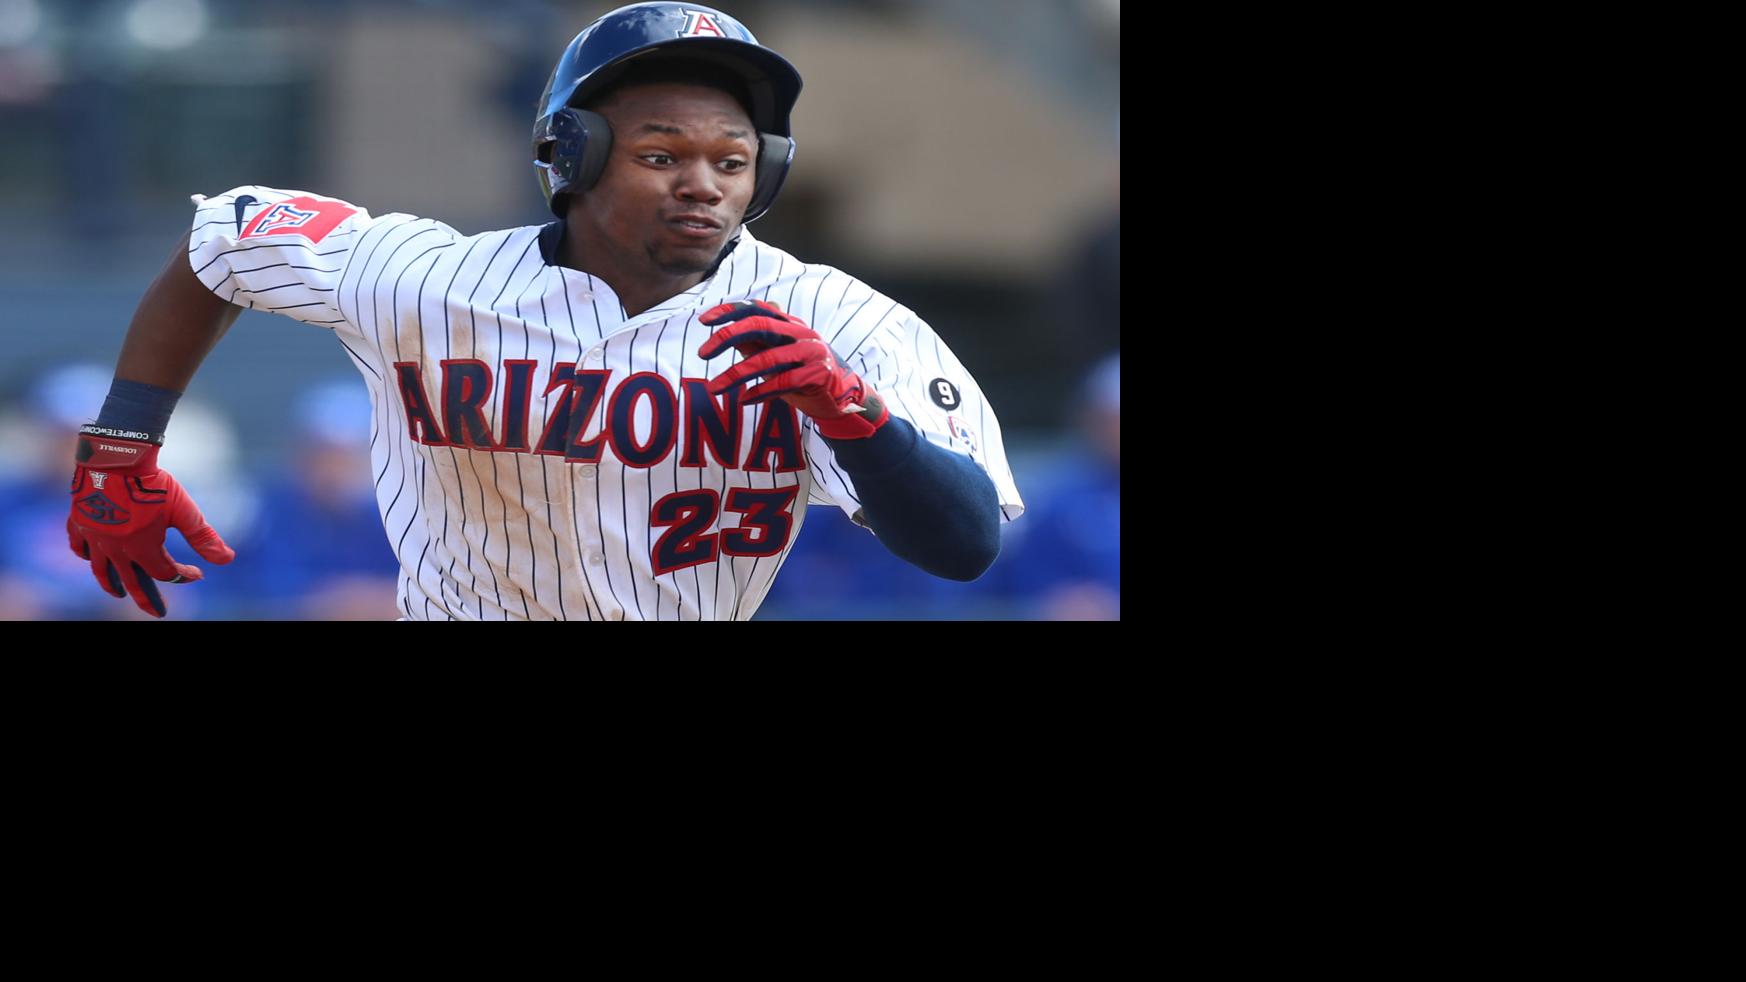 Arizona Wildcats center fielder Donta' Williams selected by Baltimore  Orioles in 4th round of 2021 MLB Draft - Arizona Desert Swarm